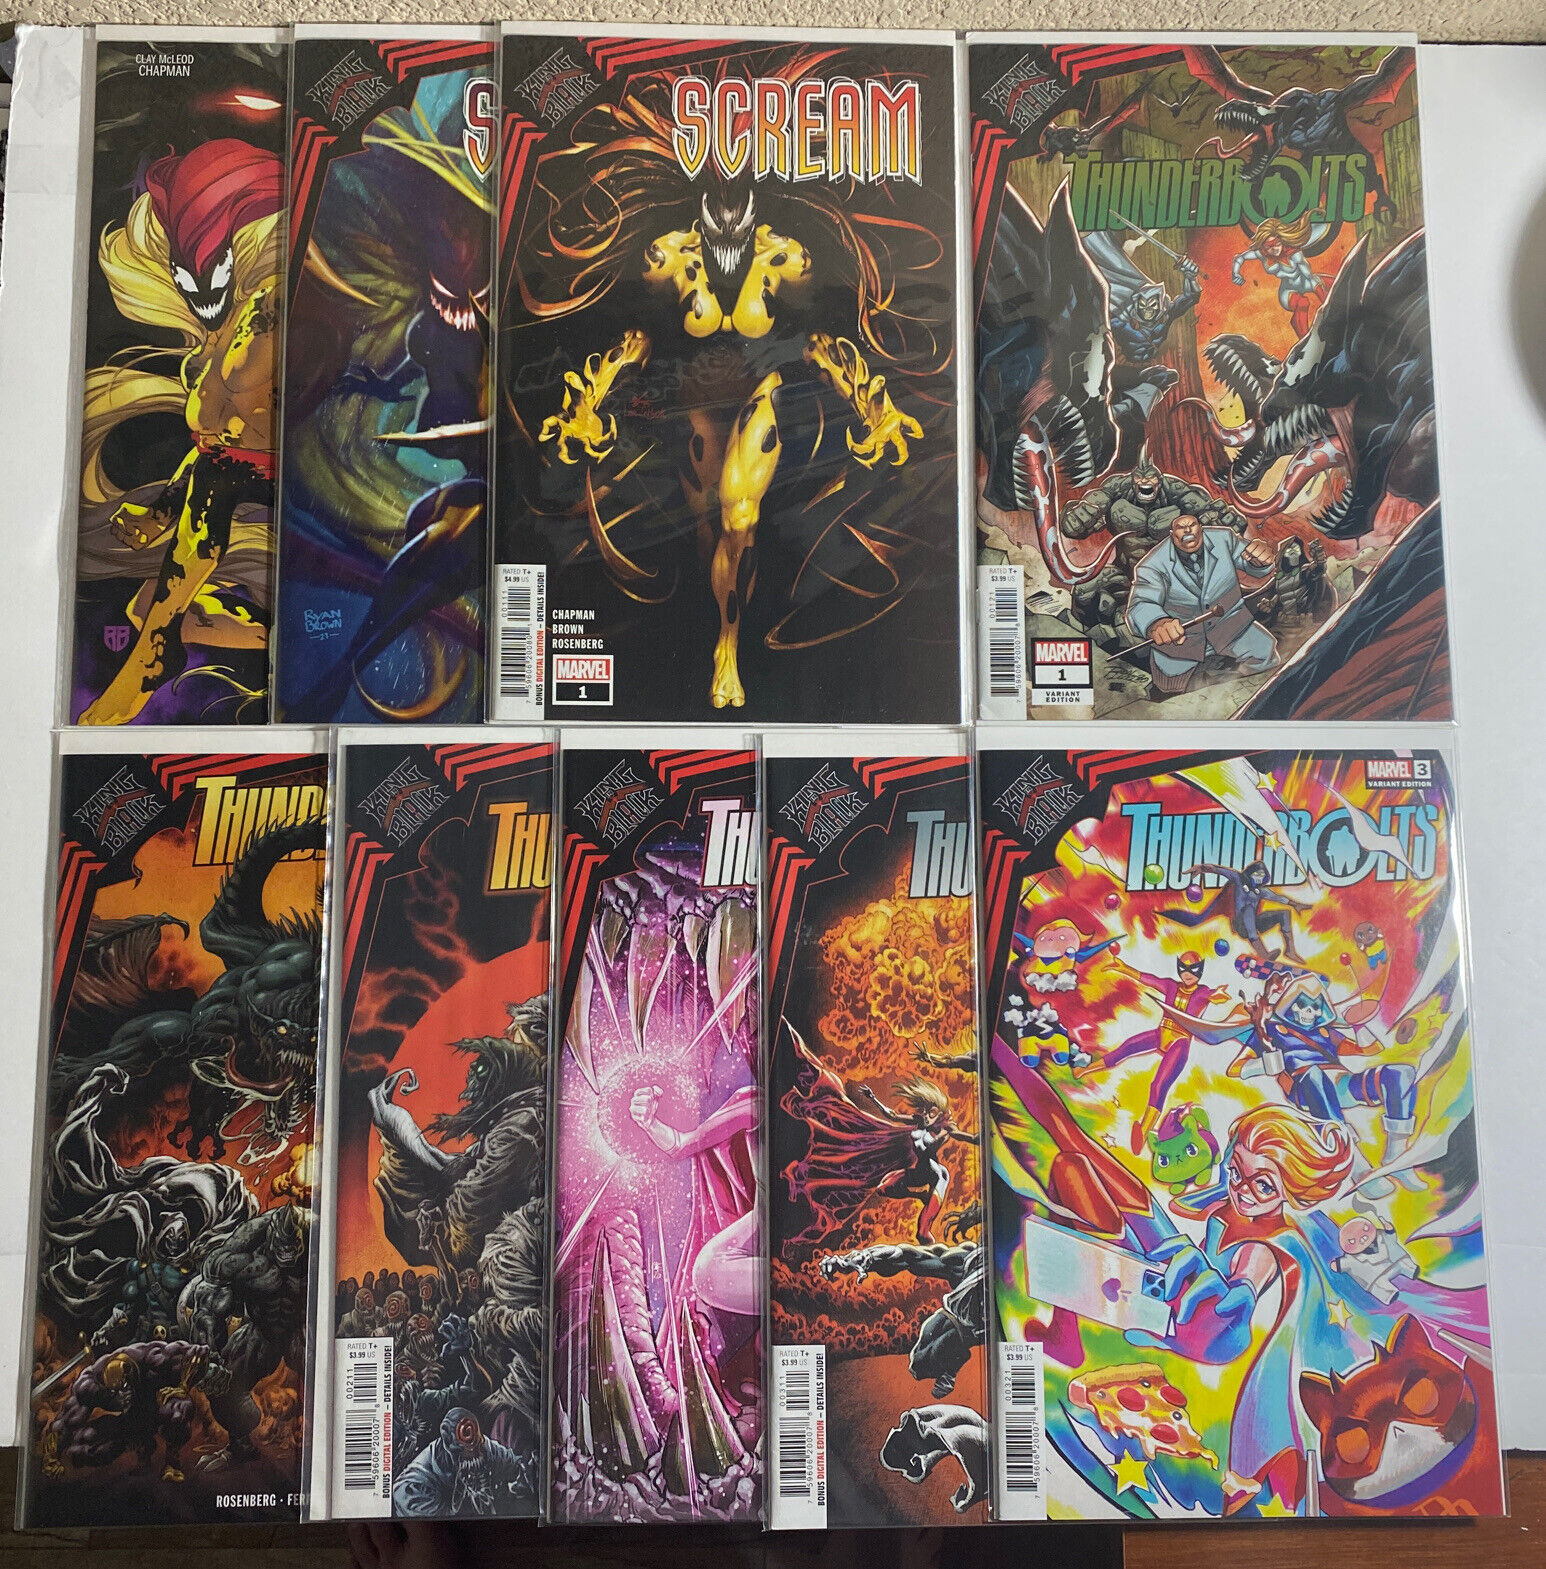 THUNDERBOLTS KING IN BLACK 1 2 3 + Variant Scream 1 - Includes 9 Books Total NM